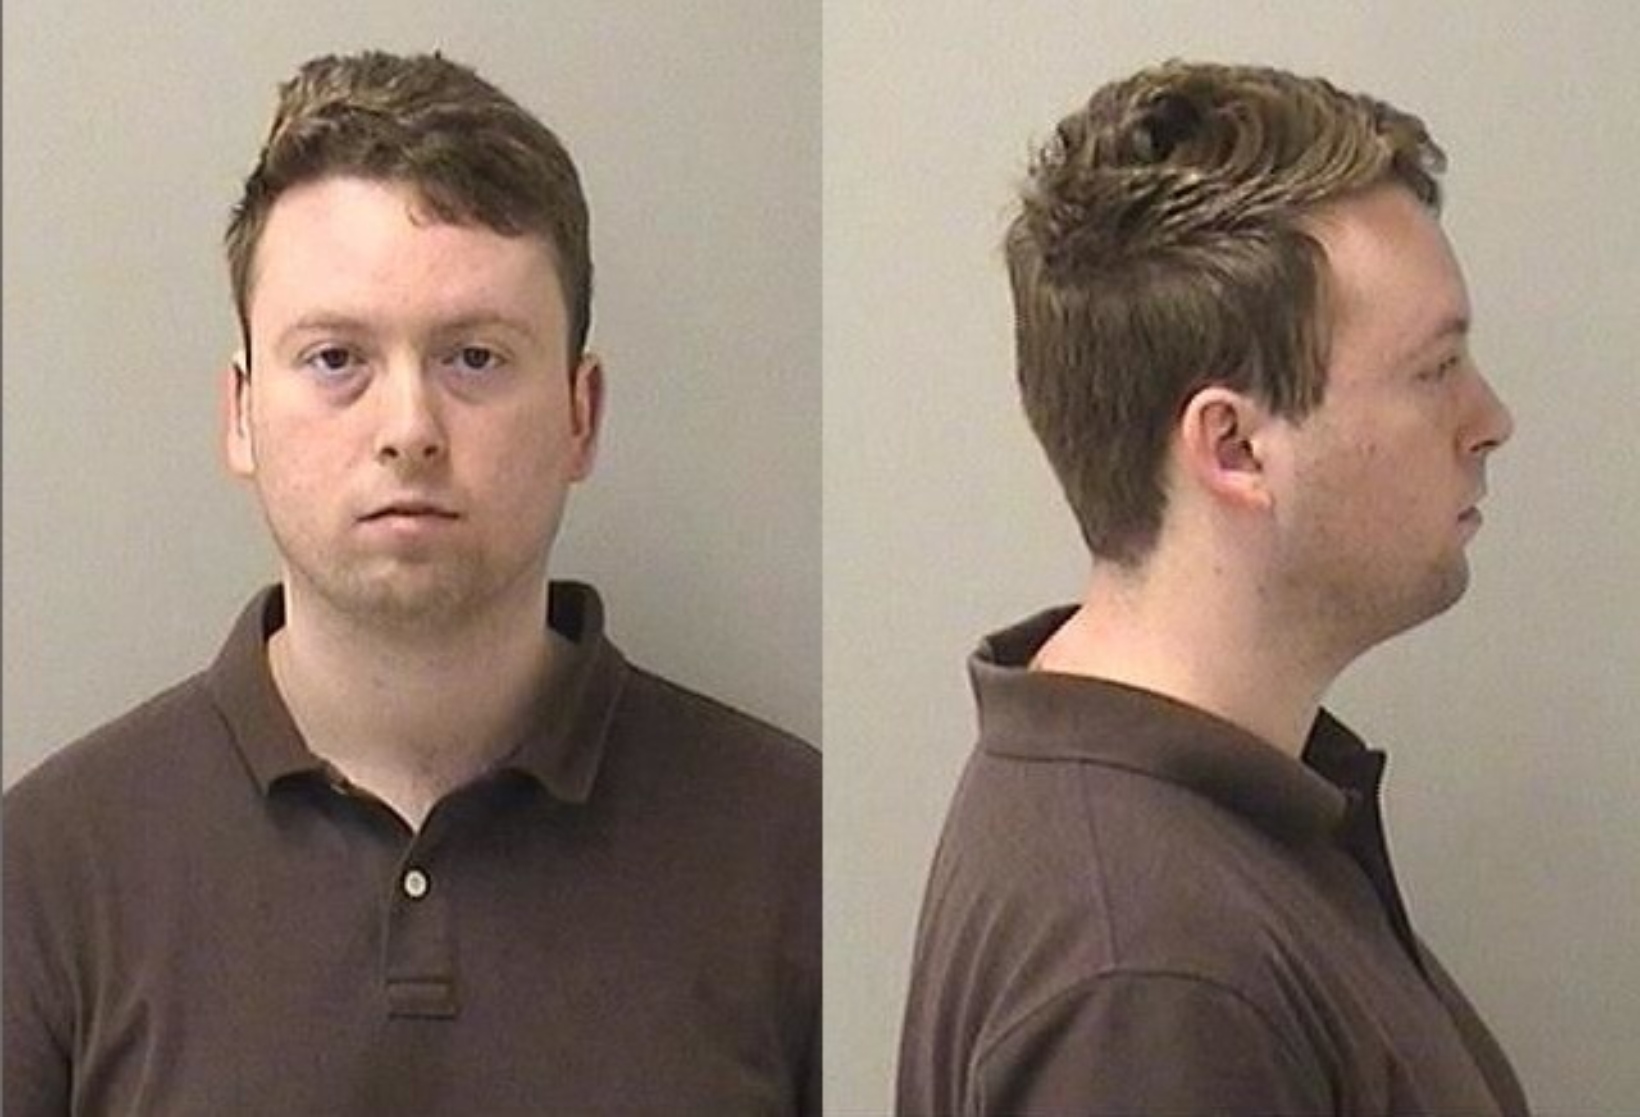 Kevin D. Lee, 24, of South Elgin was a Carpentersville Middle School teacher and coach arrested for making inappropriate comments to a child